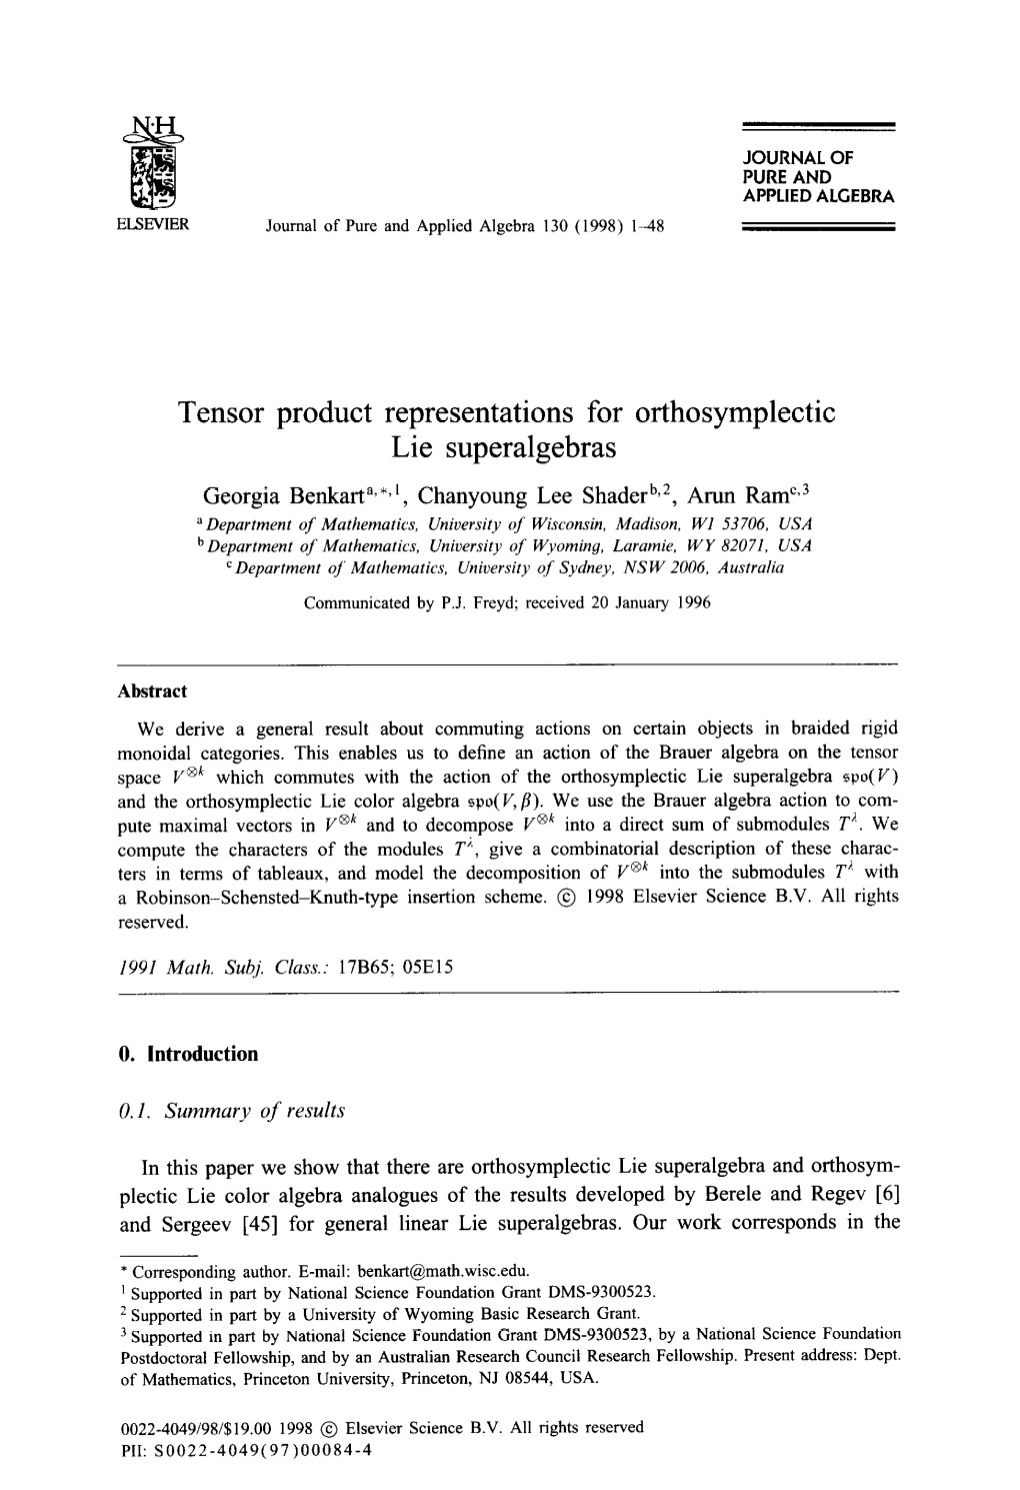 Tensor Product Representations for Orthosymplectic Lie Superalgebras